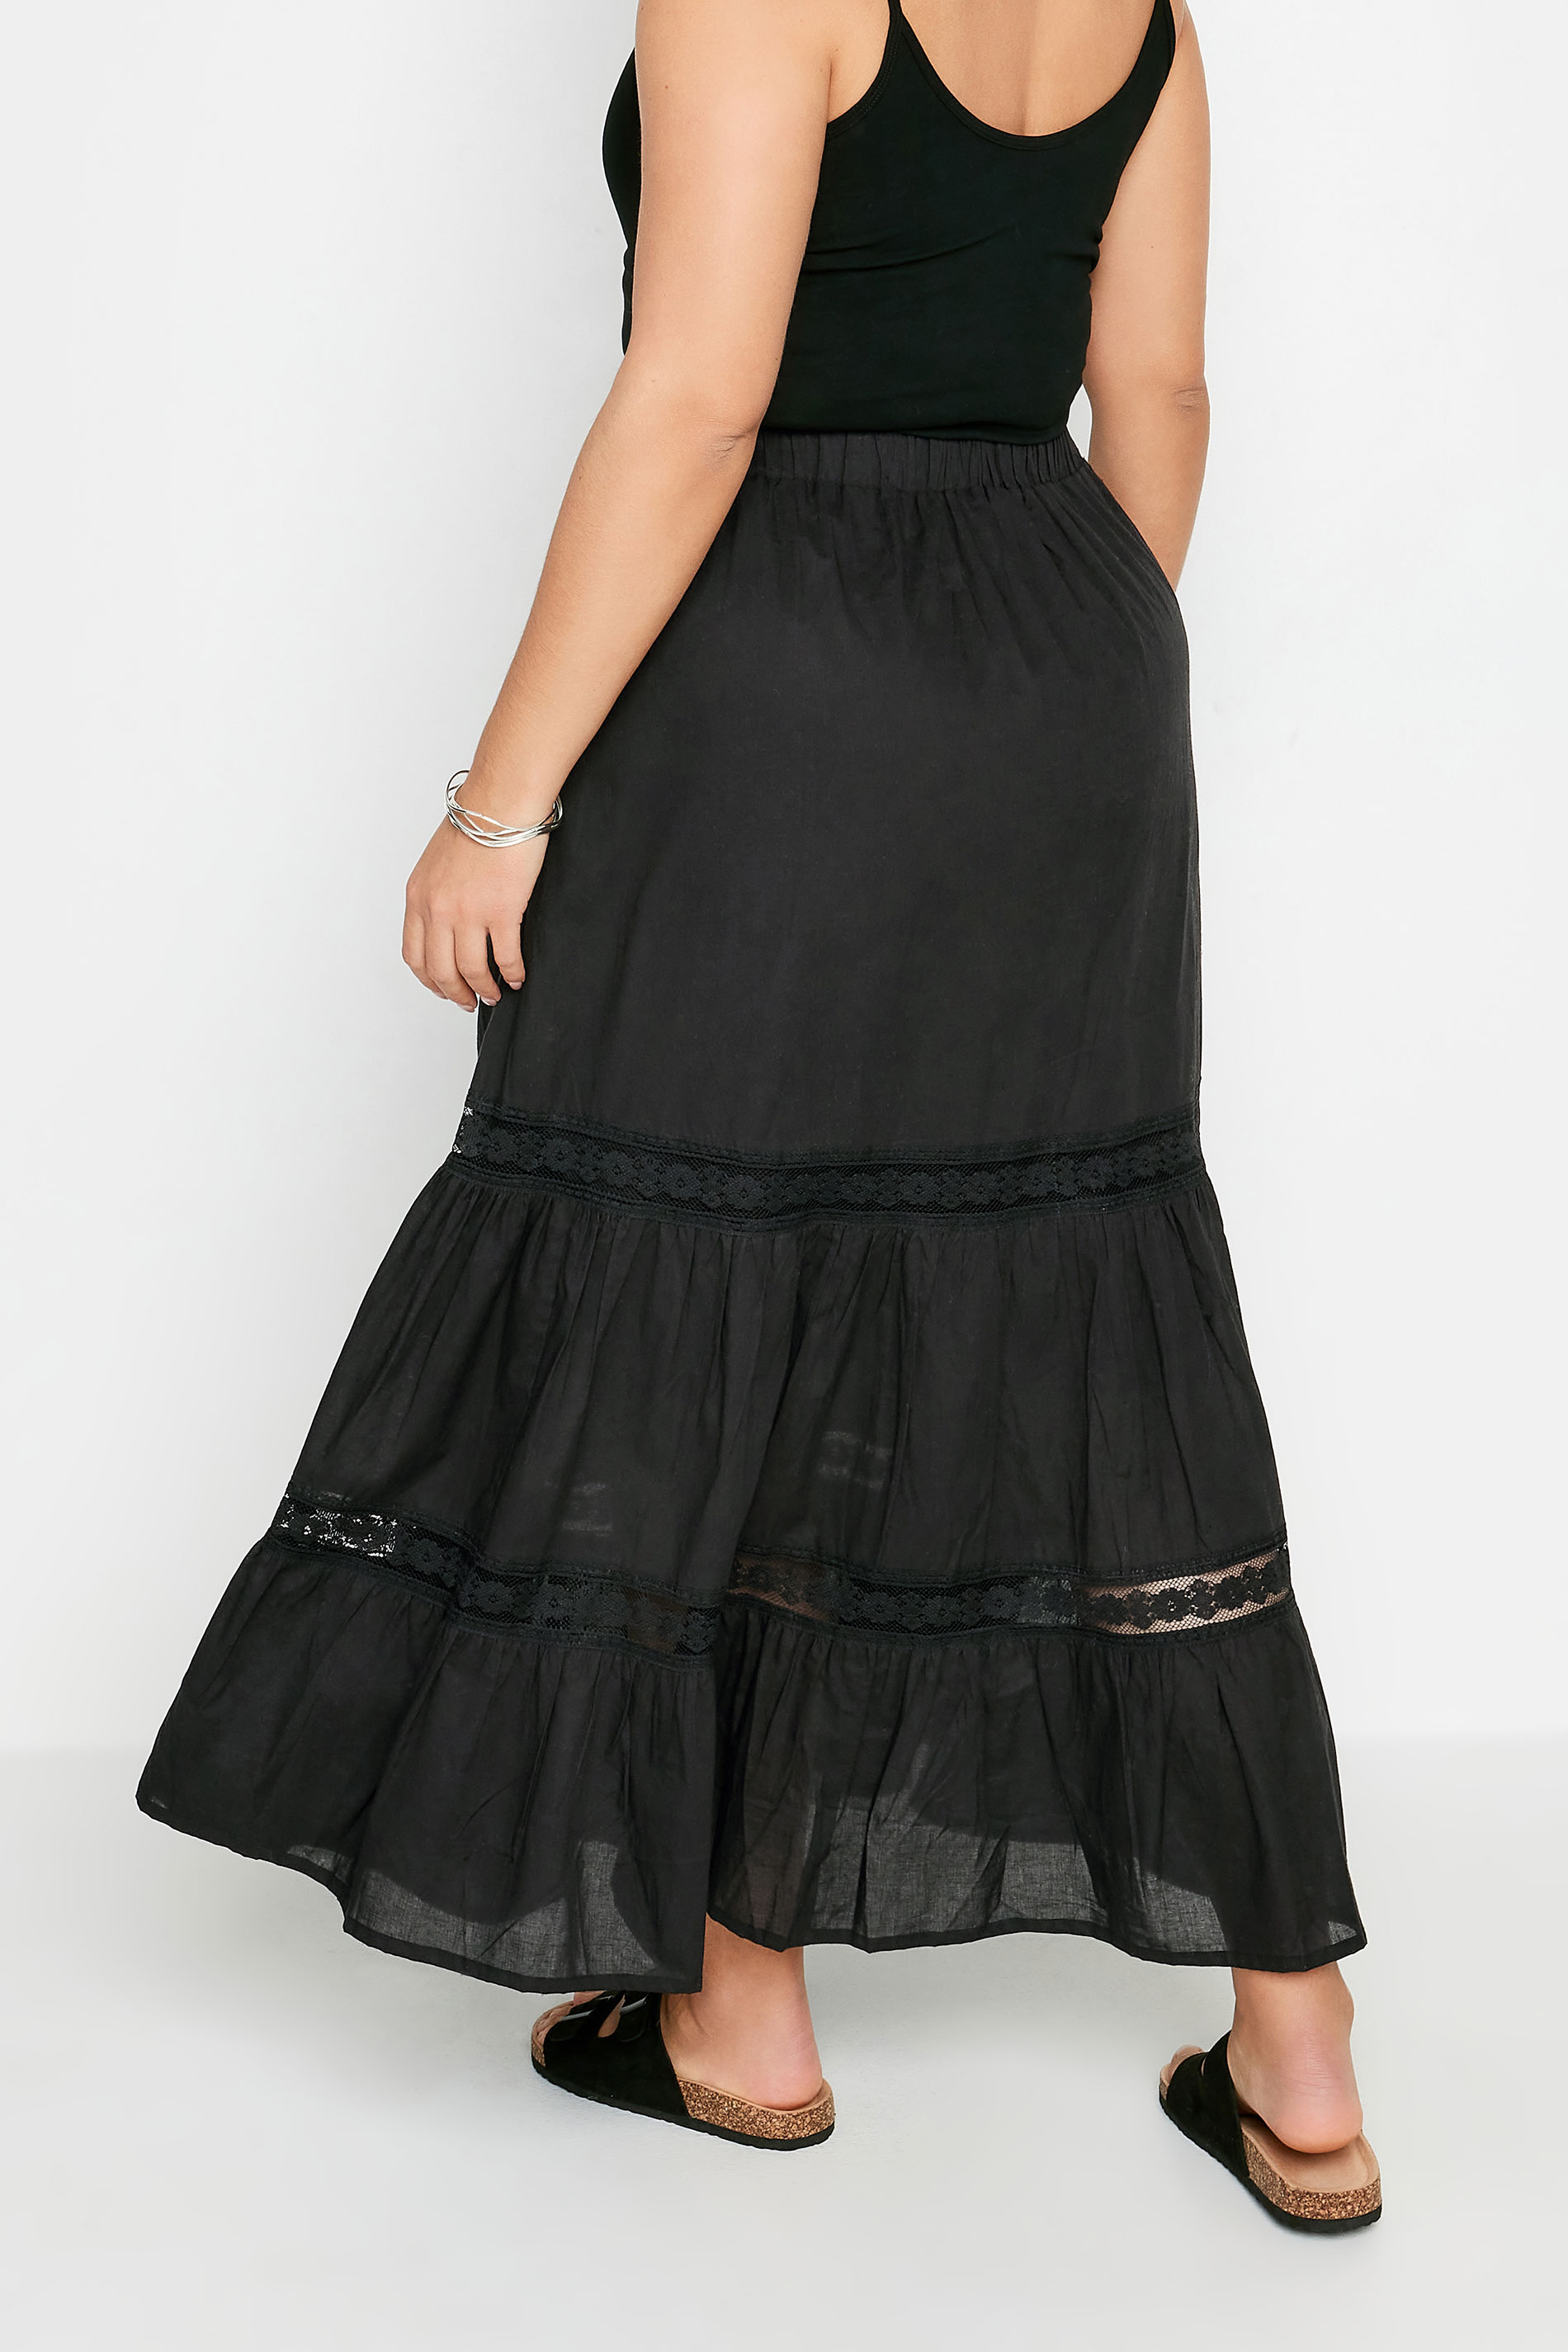 YOURS Plus Size Black Tiered Lace Cotton Maxi Skirt | Yours Clothing 3